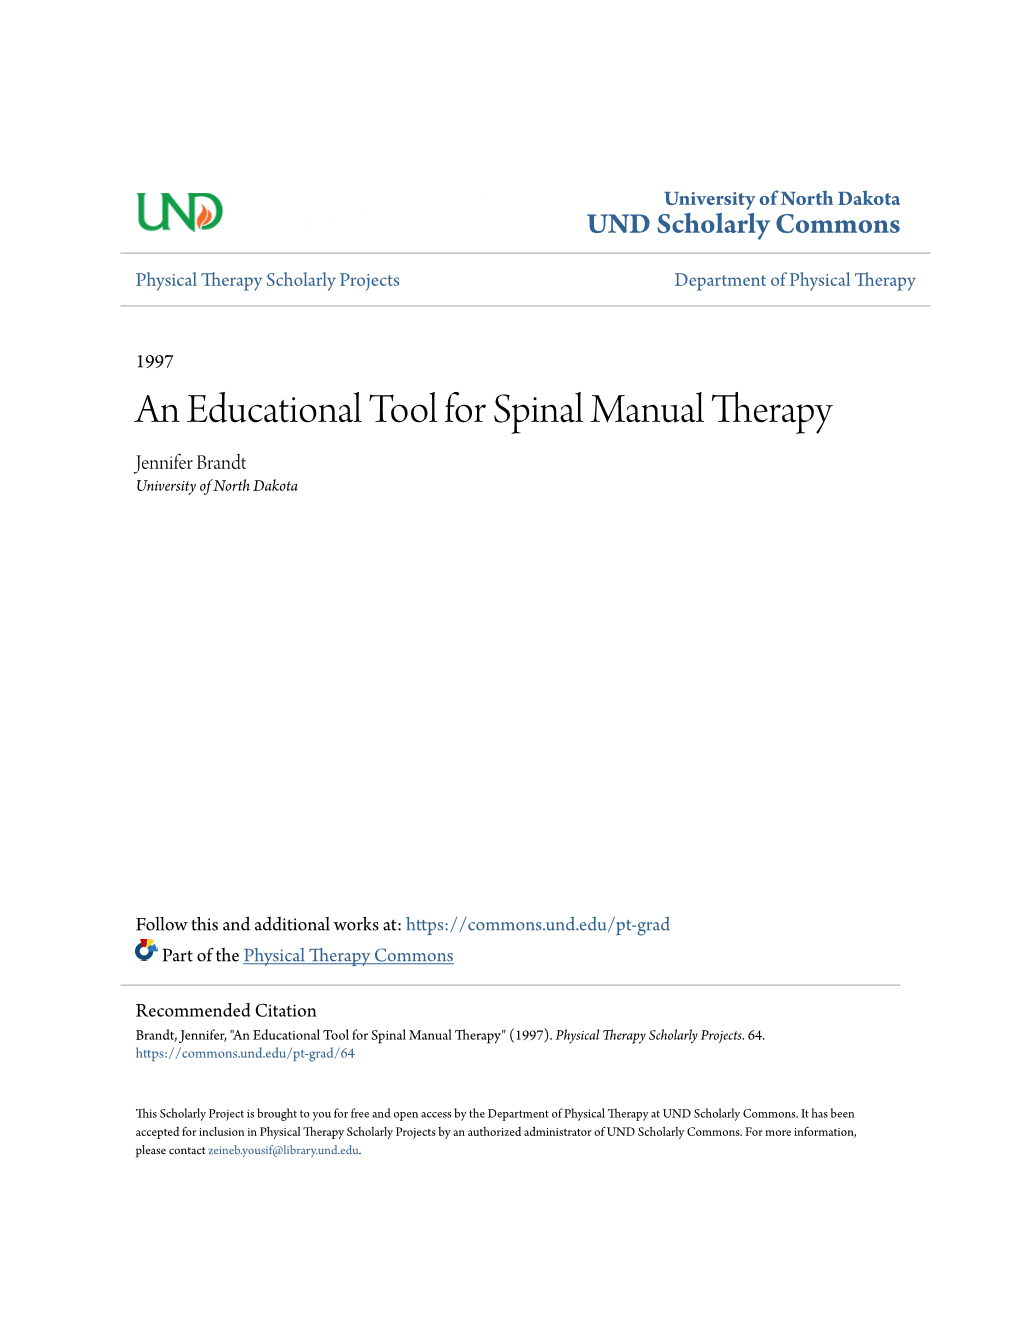 An Educational Tool for Spinal Manual Therapy Jennifer Brandt University of North Dakota